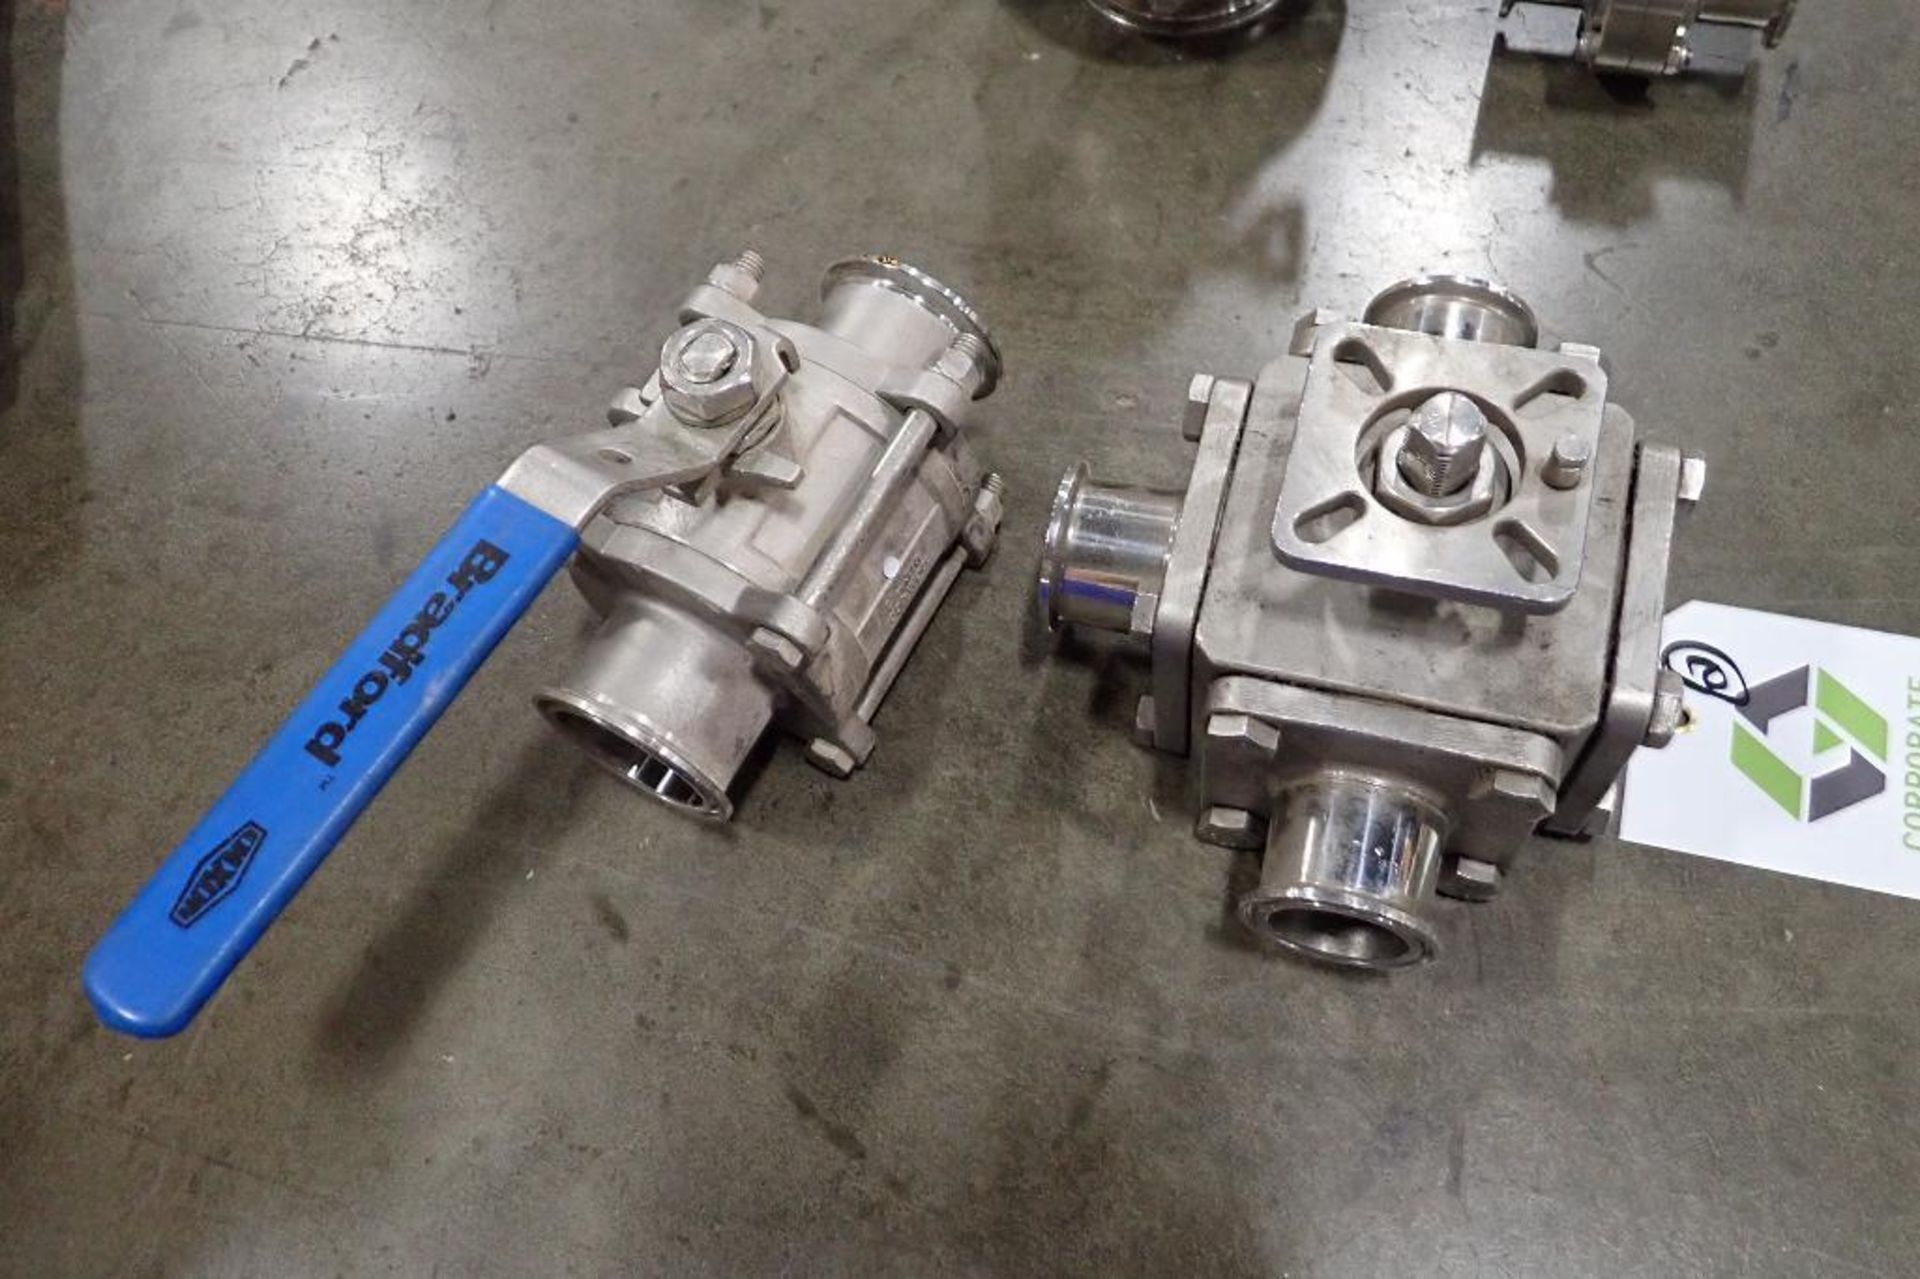 SS 1.5 in. 3-way ball valve, 2 in. SS ball valve (LOT). (See photos for additional specs). **Rigging